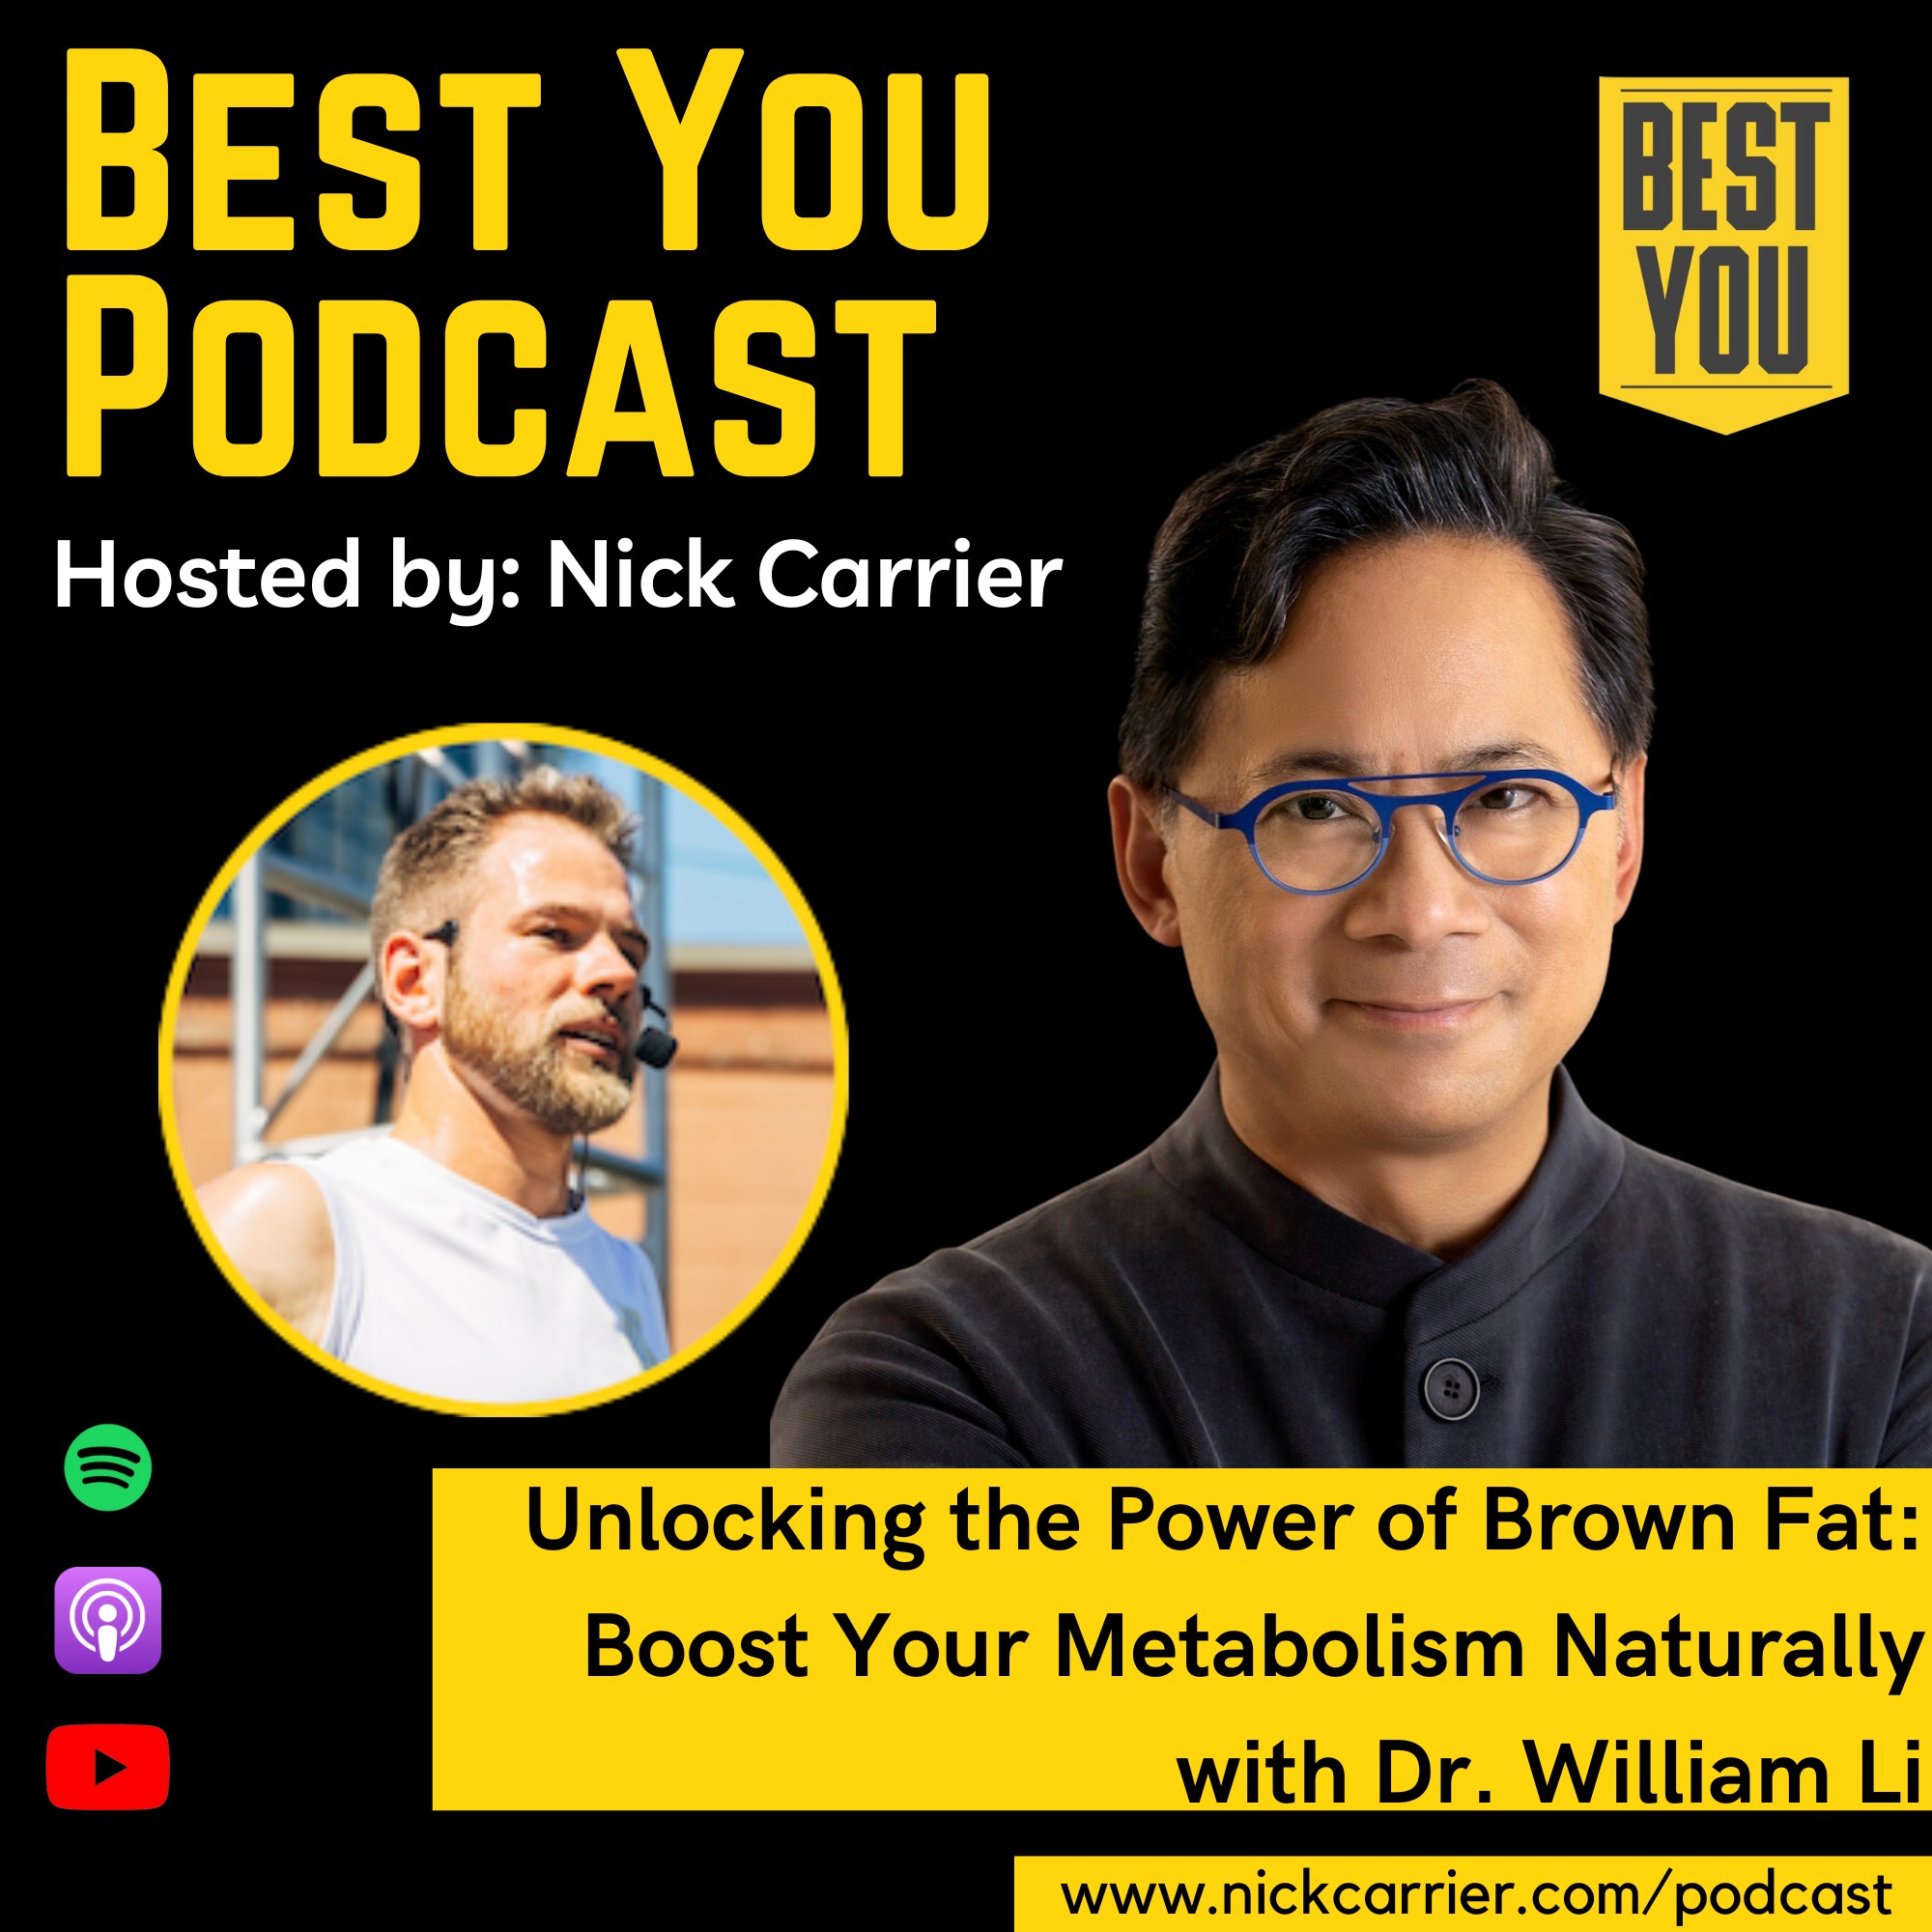 Unlocking the Power of Brown Fat: Boost Your Metabolism Naturally with Dr. William Li